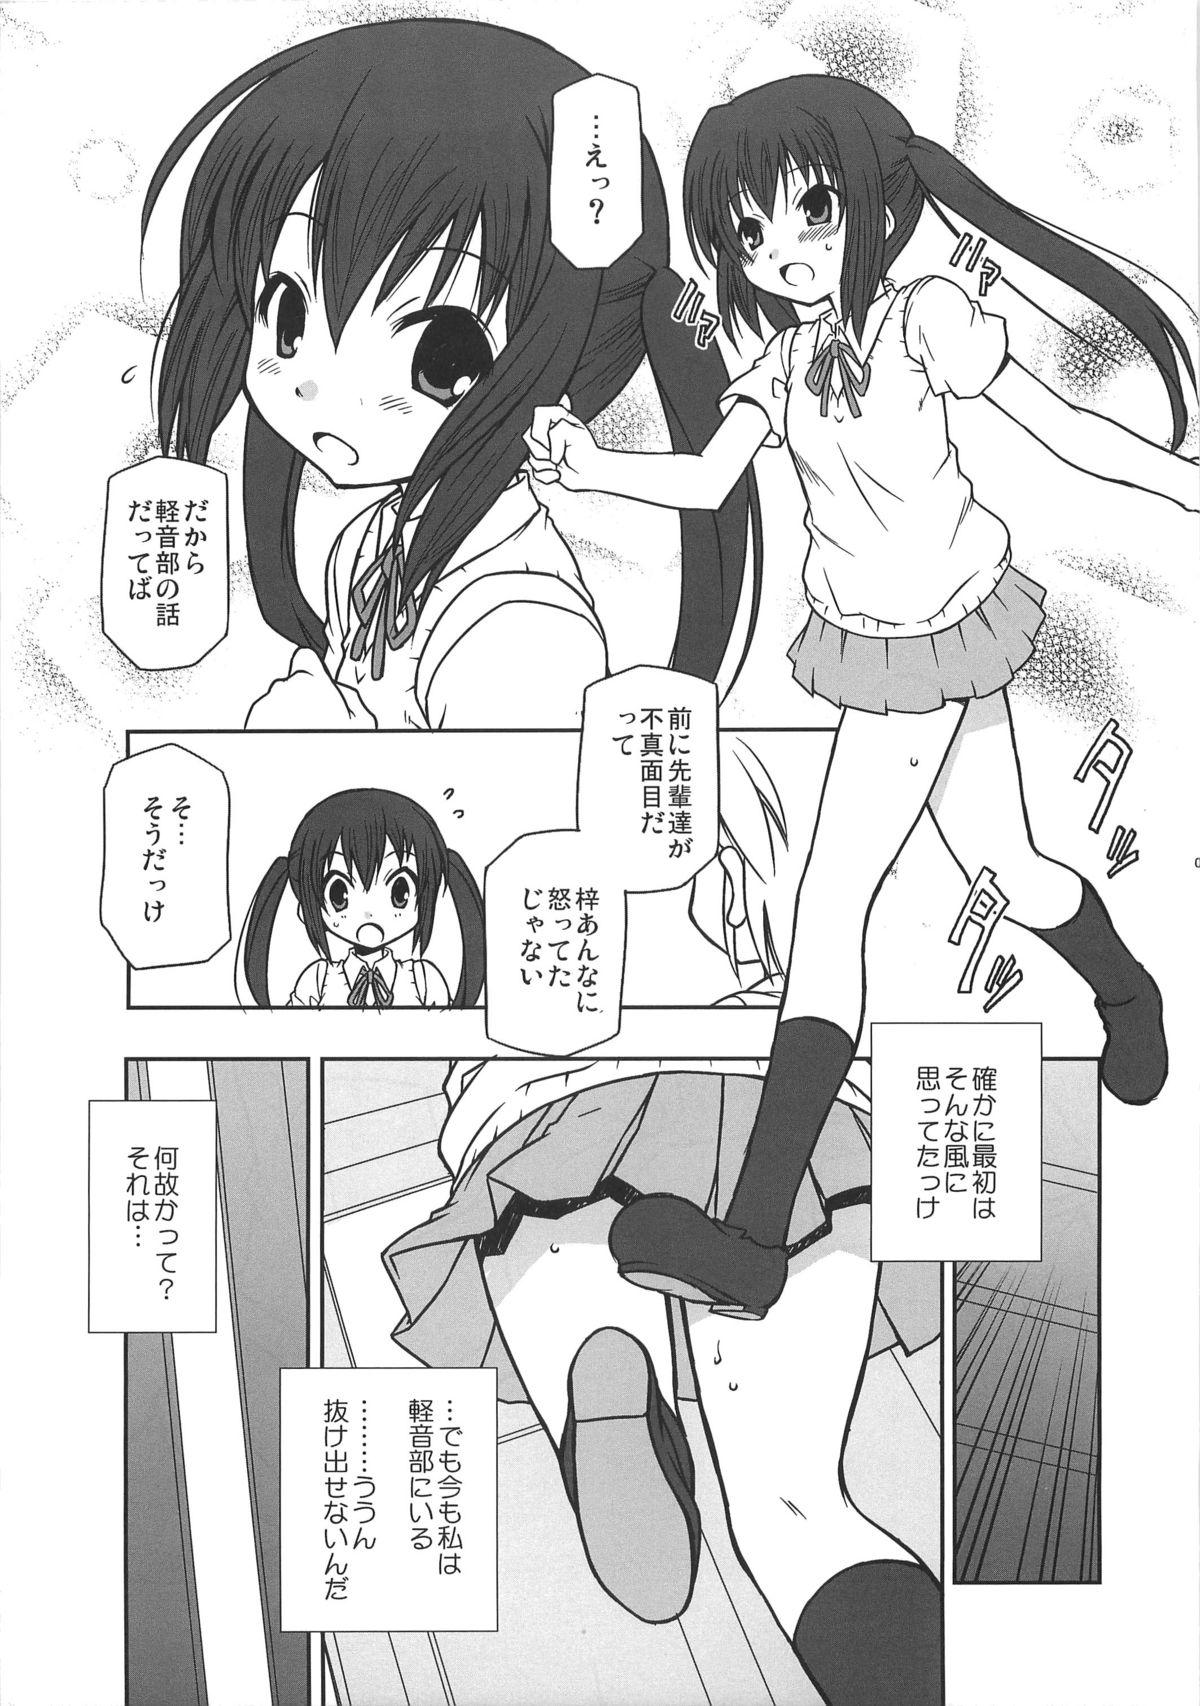 Officesex Shuukan Himitsu no K-ON bu! - K-on This - Page 4